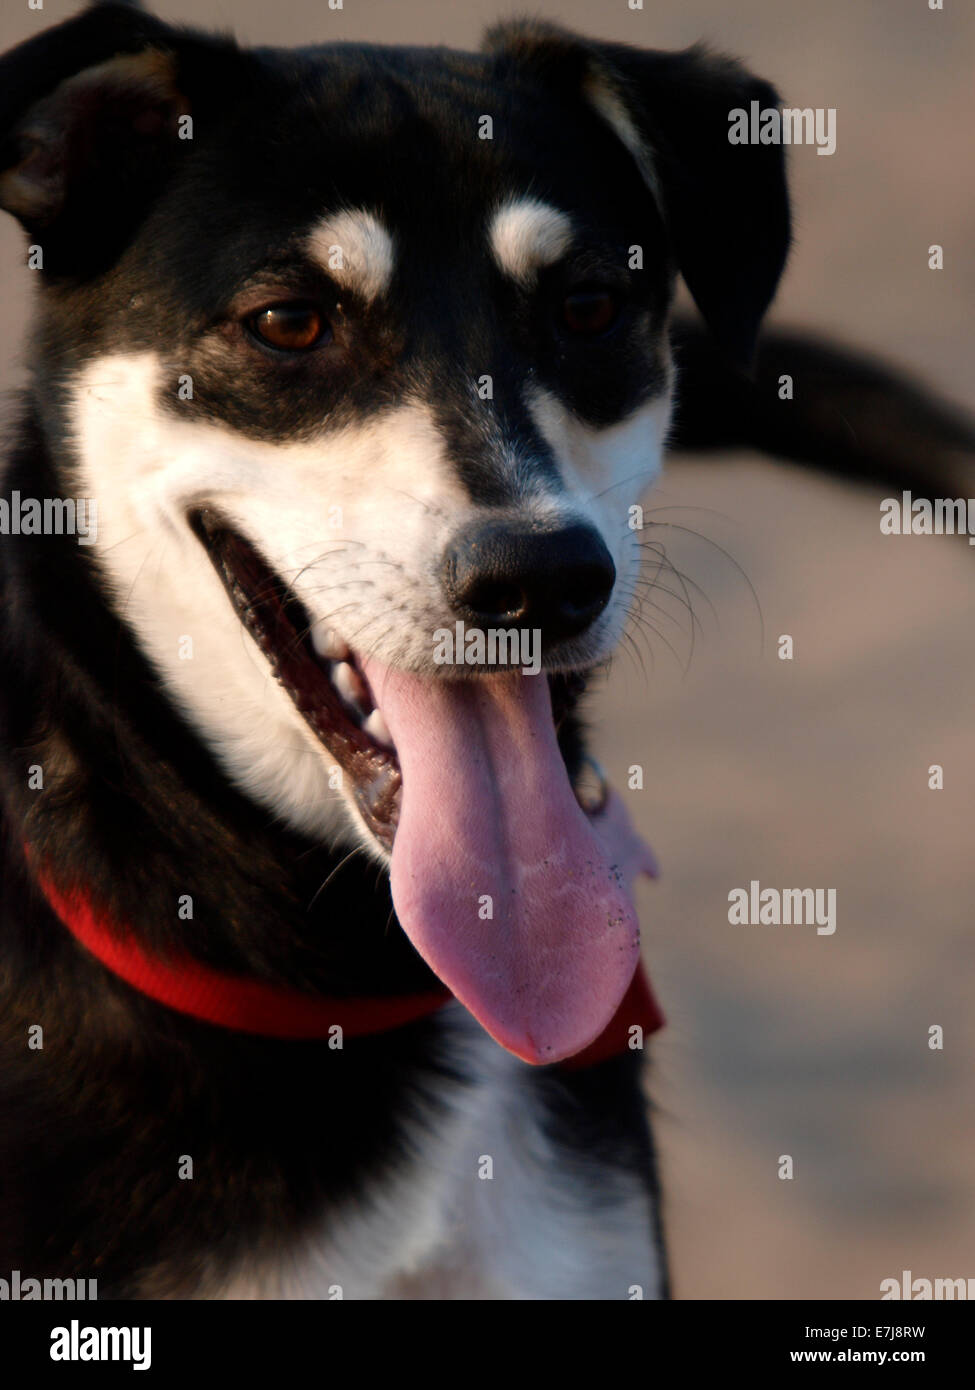 Portrait of a black and white dog with tongue hanging out, UK Stock Photo